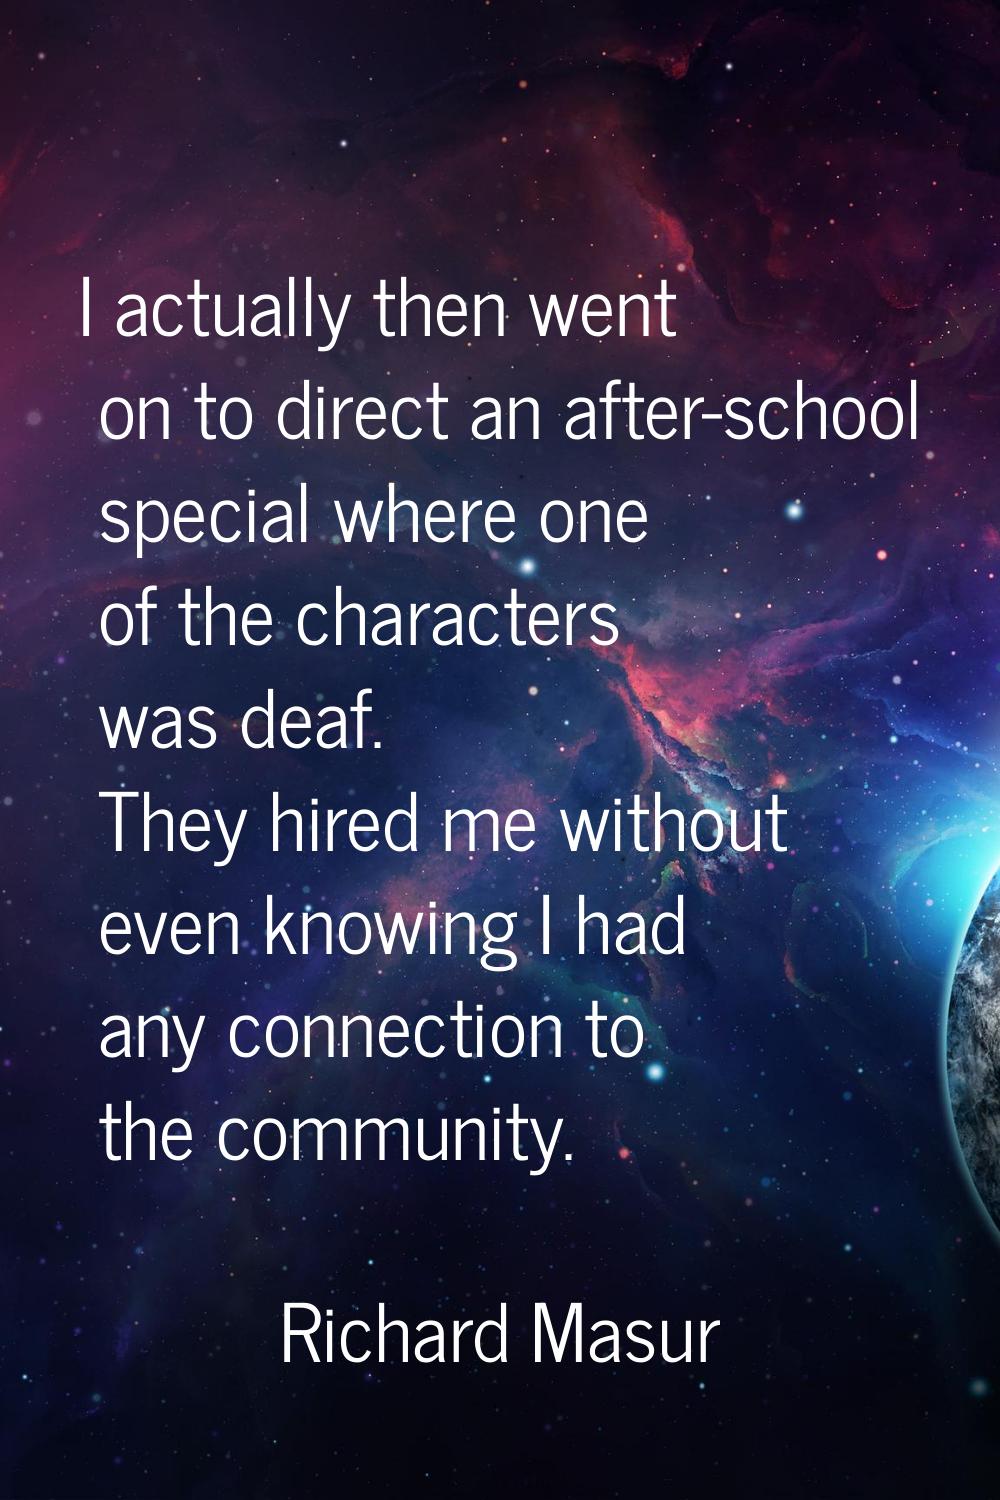 I actually then went on to direct an after-school special where one of the characters was deaf. The